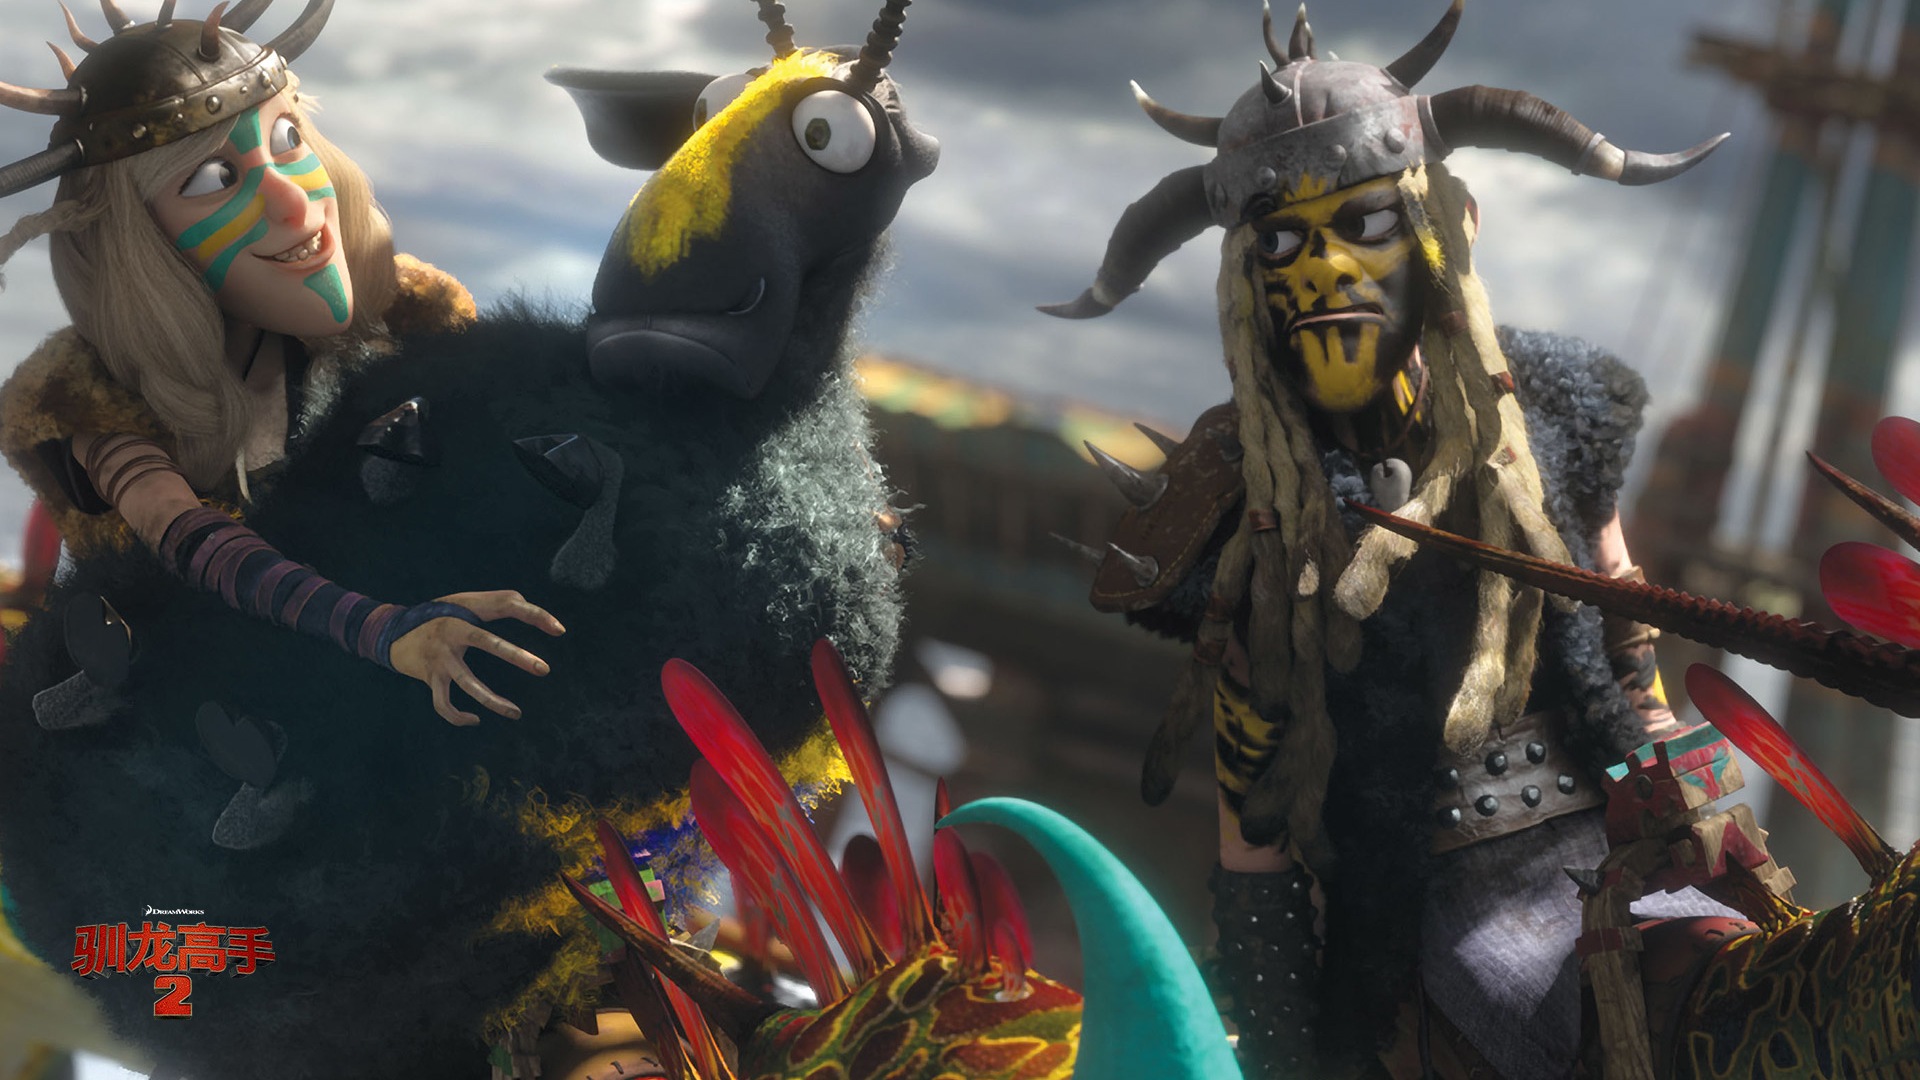 How to Train Your Dragon 2 驯龙高手2 高清壁纸5 - 1920x1080